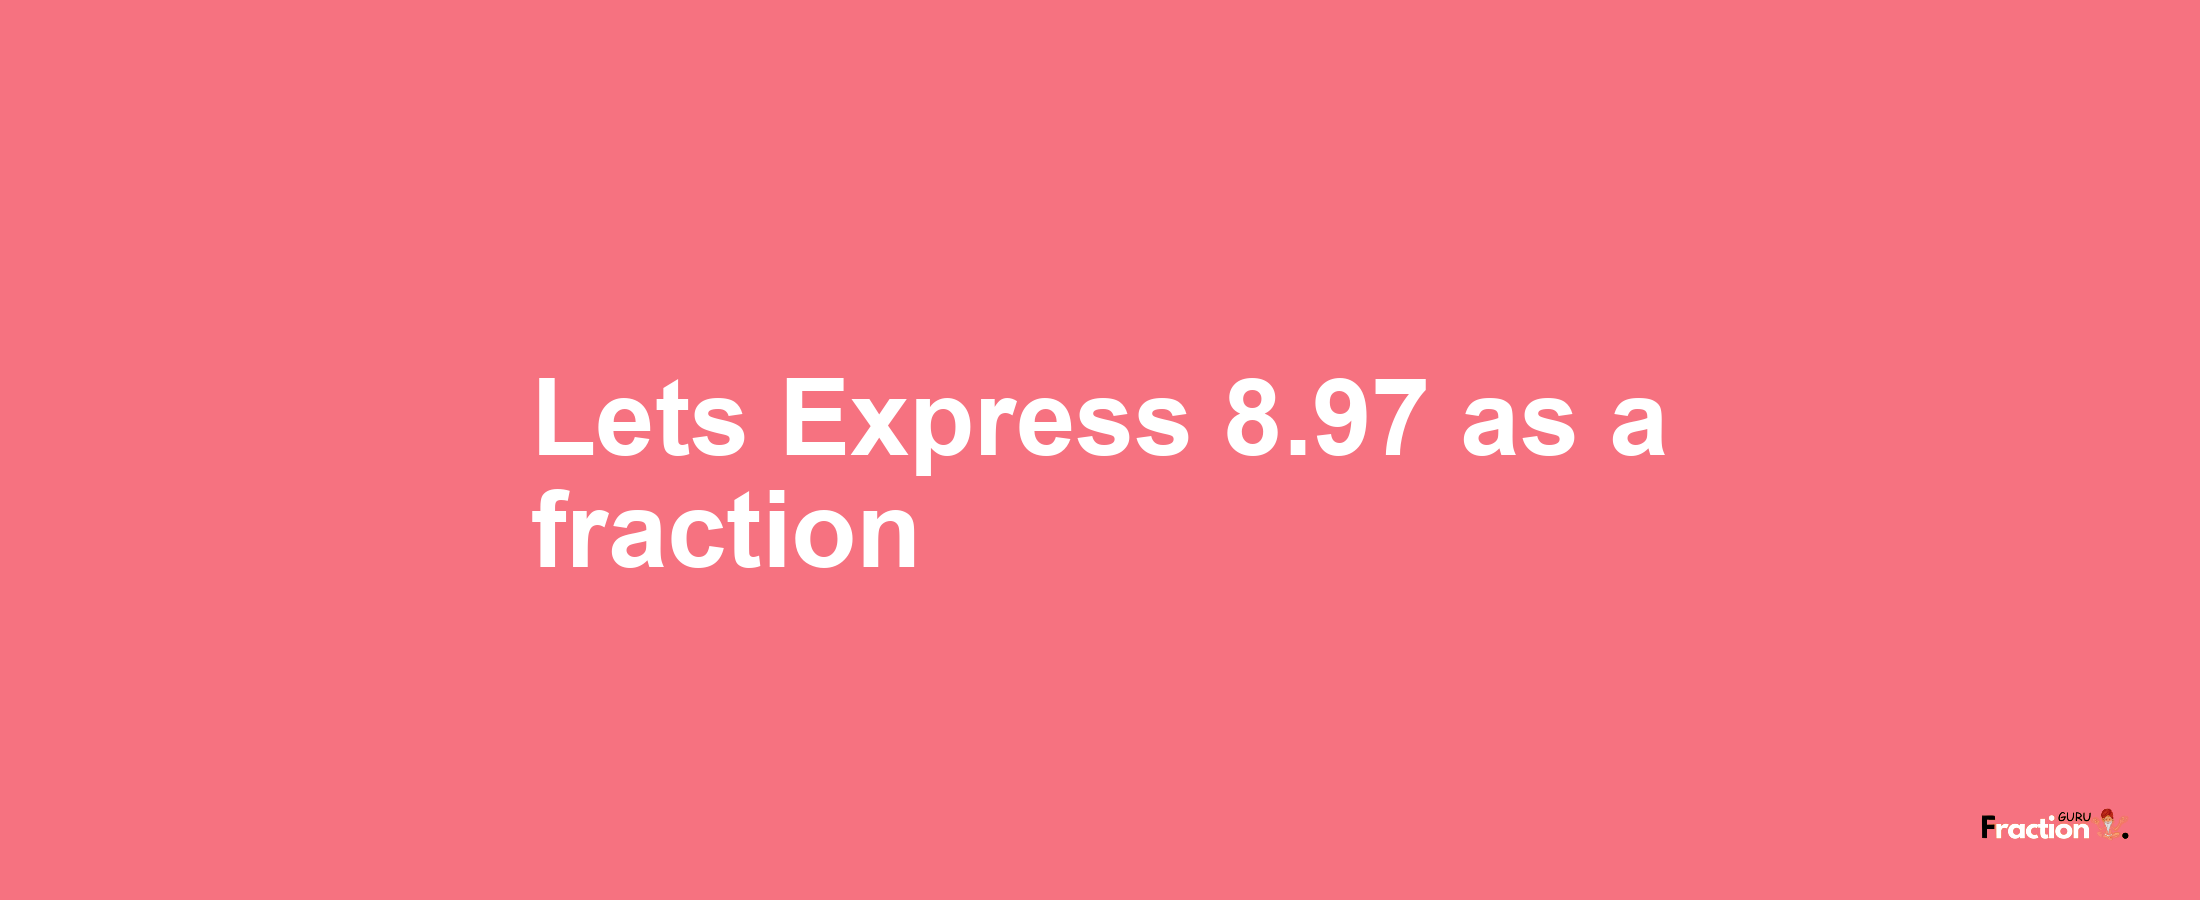 Lets Express 8.97 as afraction